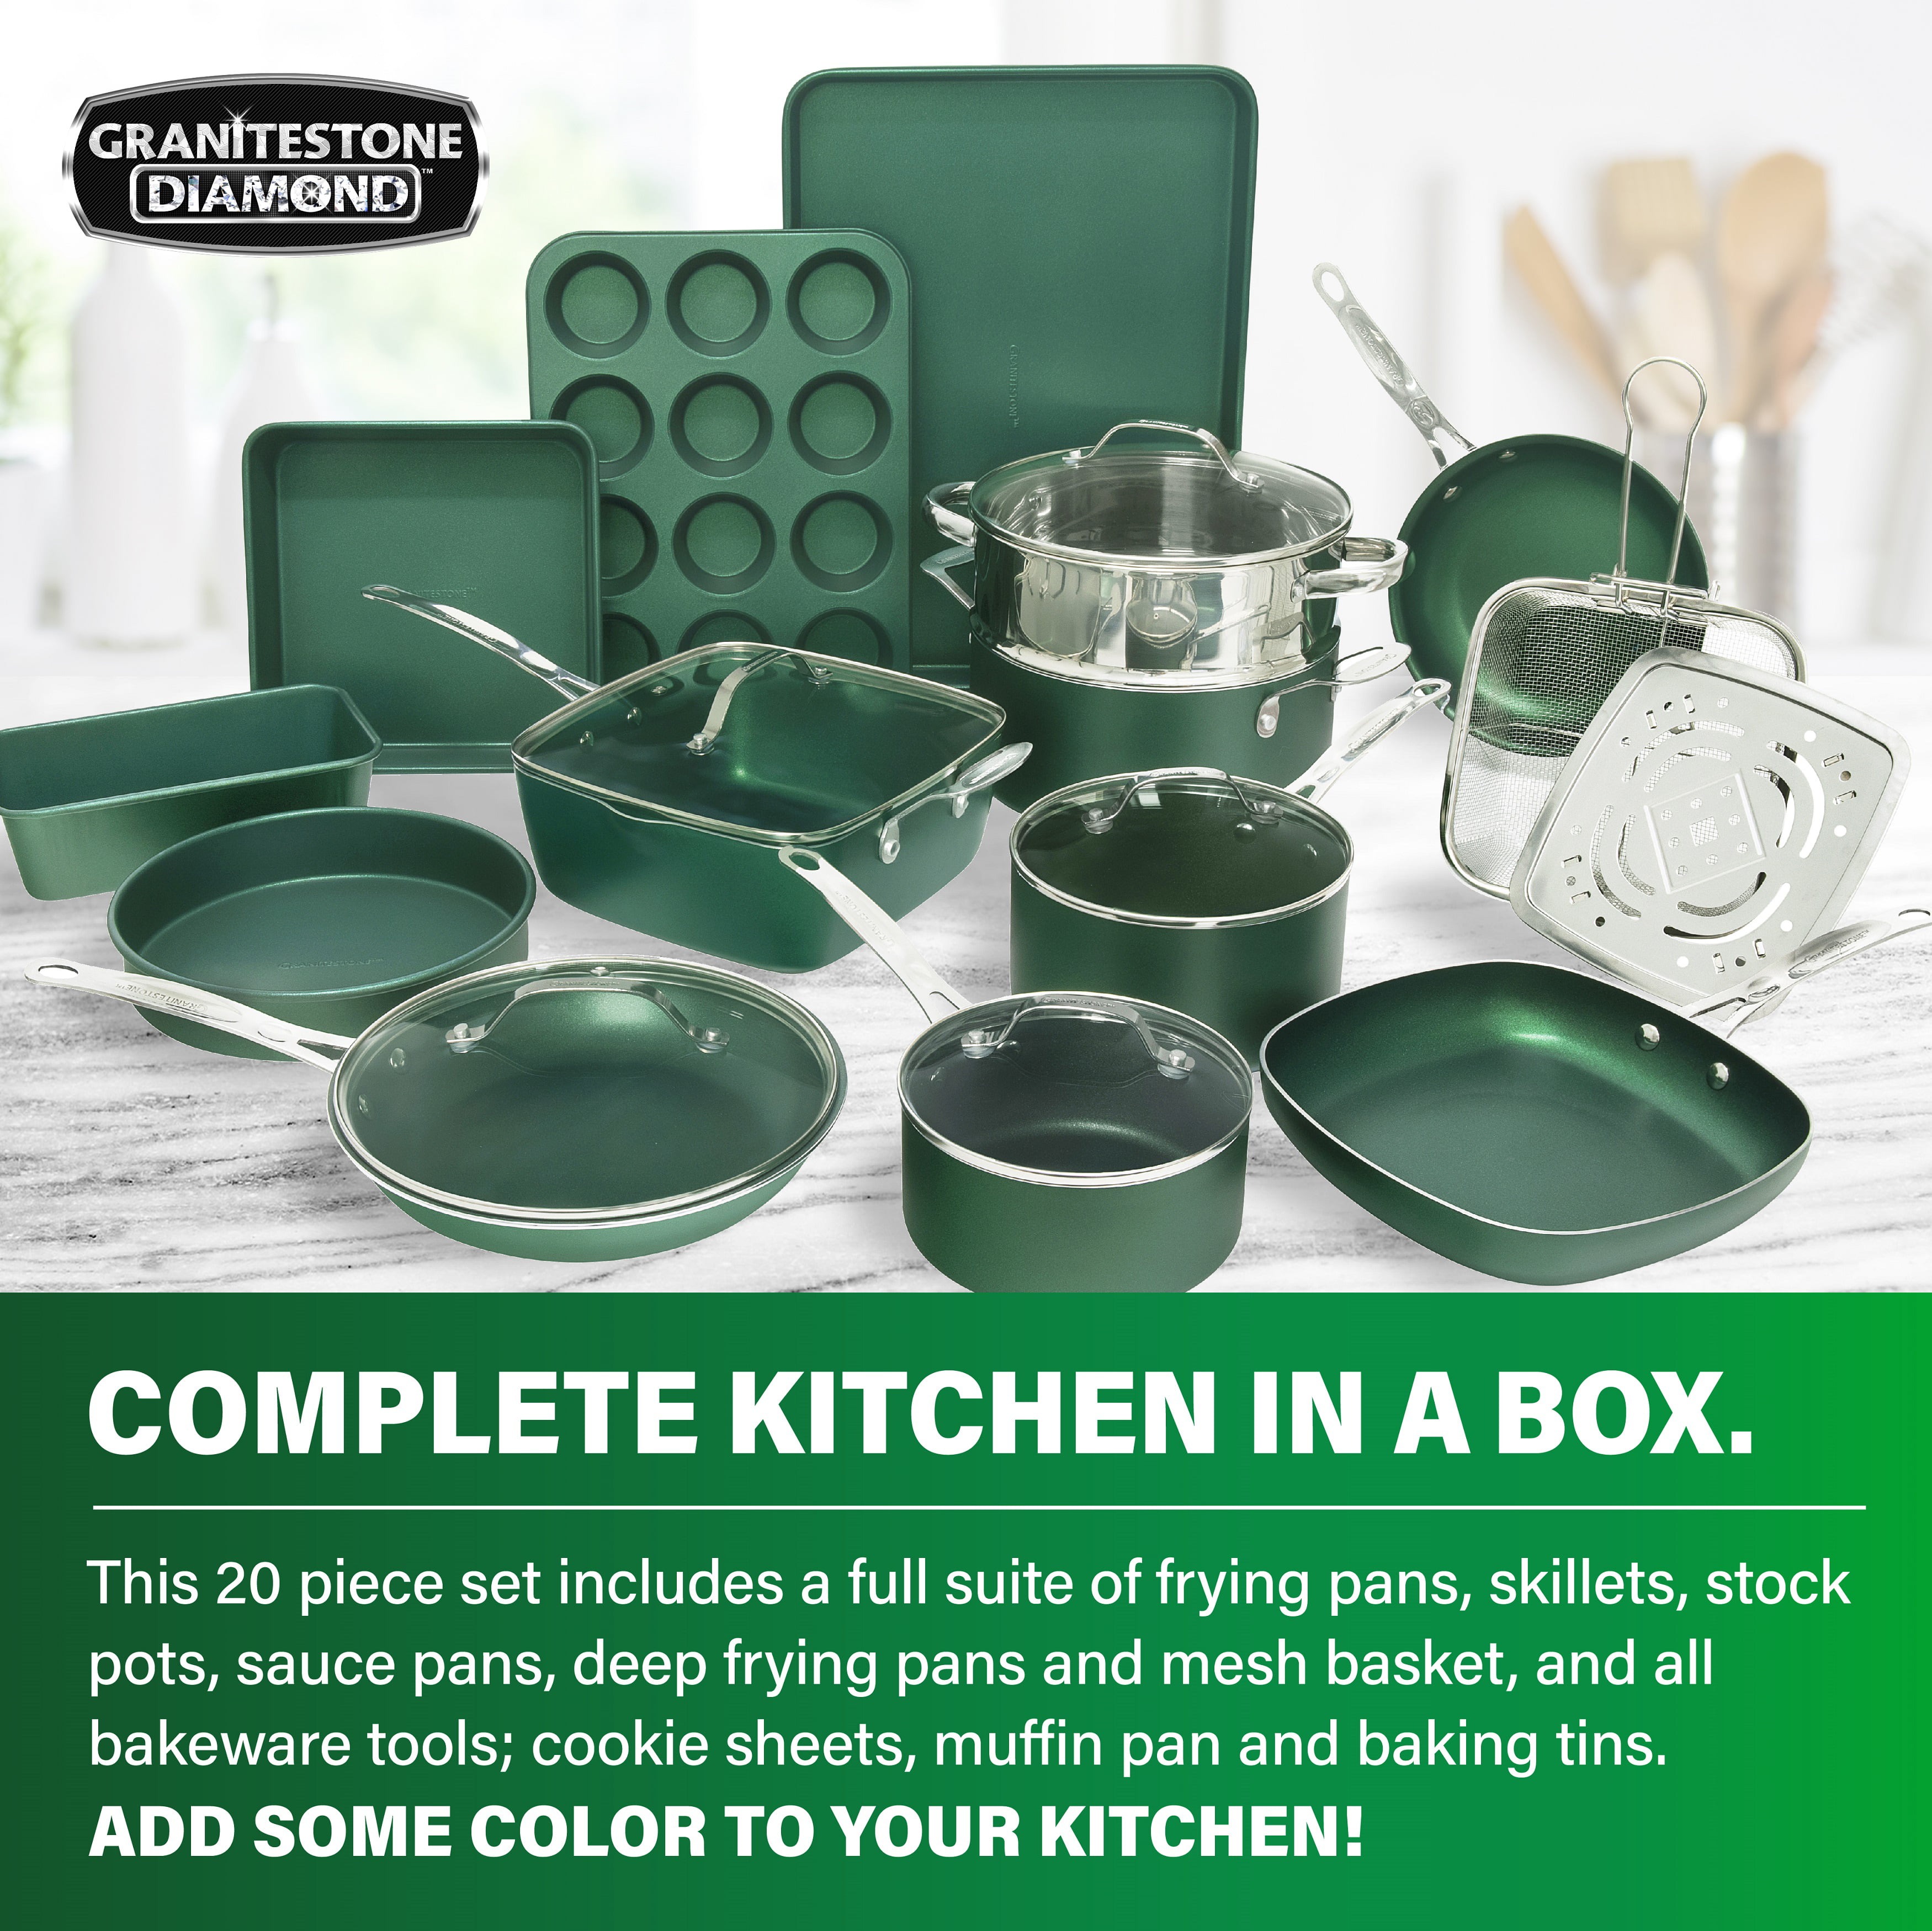 Bakken-Swiss 20-Piece Kitchen Cookware Set Granite Non-Stick Eco-Friendly for All Stoves & Oven-Safe - Marble Coating